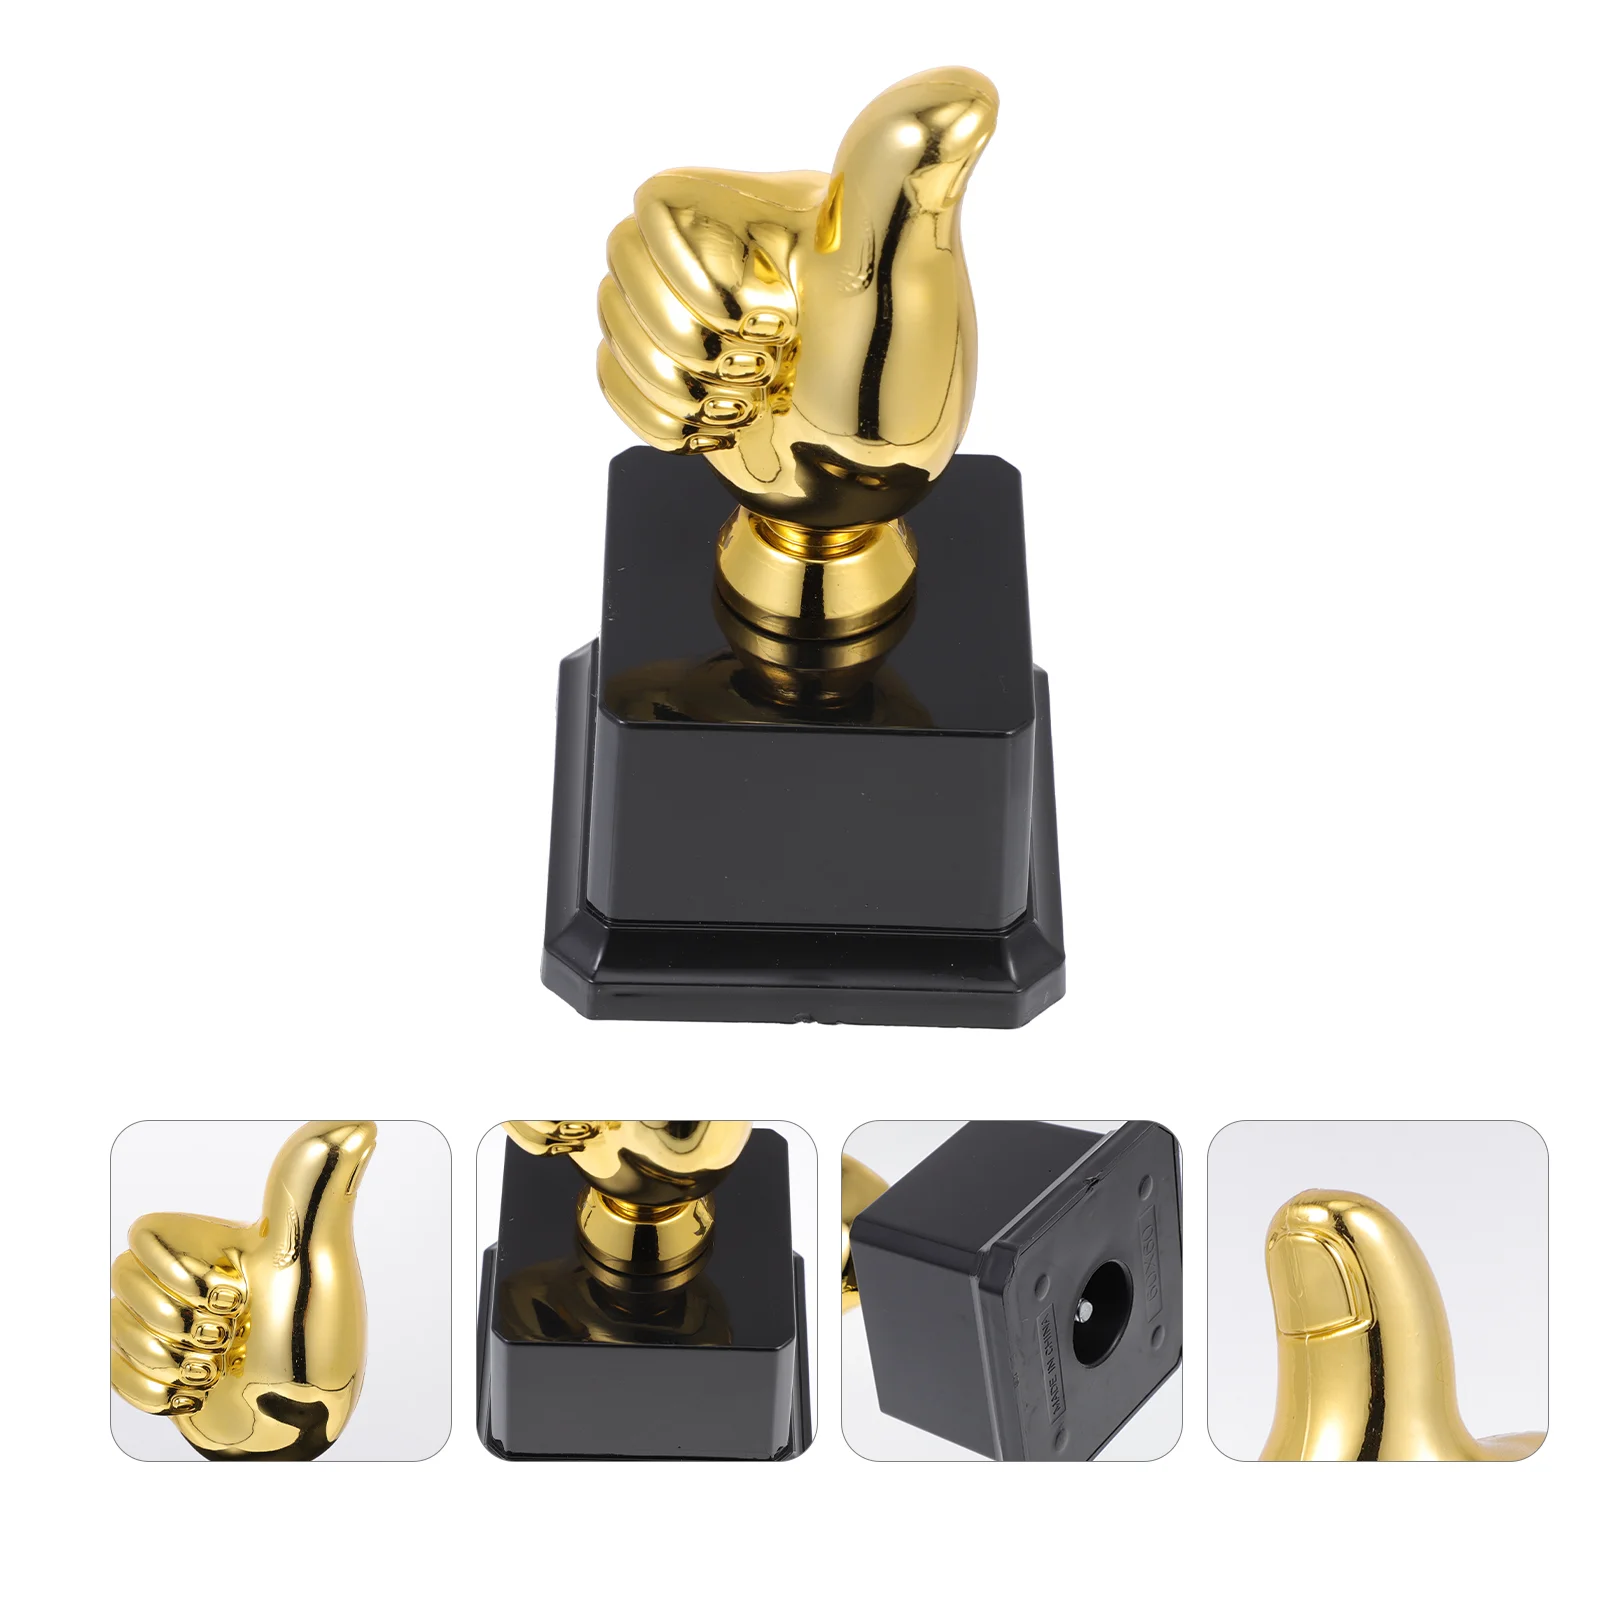 

Trophy Trophies Award Gold Cup Golden Awards Thumb Football Kids Competition Game Children Prizes Figurine Hand Decorations